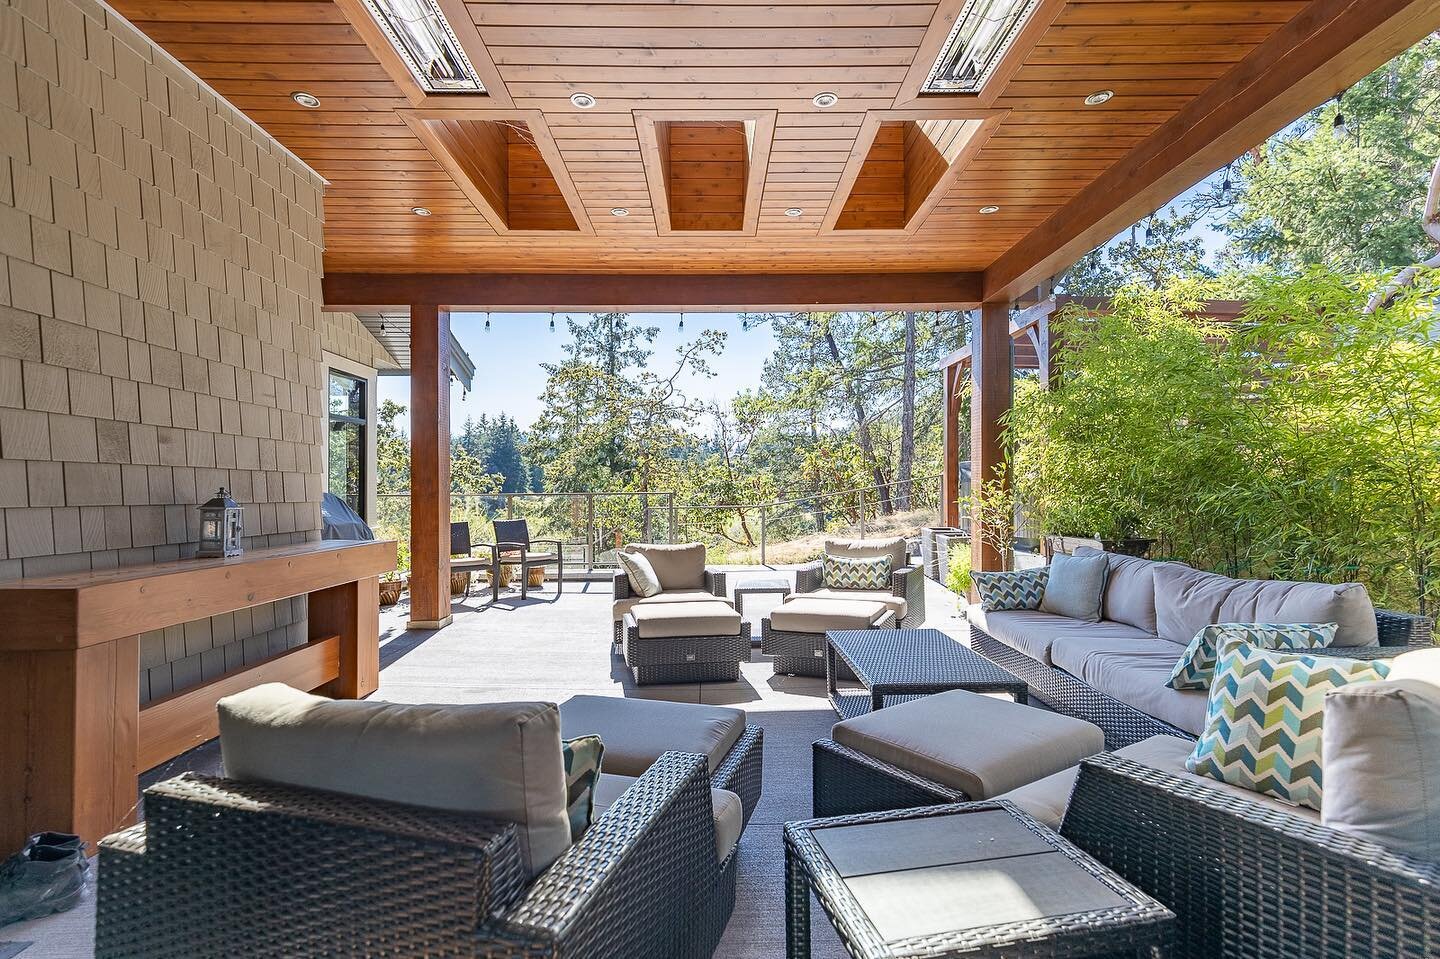 Outdoor living at its best
#redfernmedia #customhome #fairwinds #outdoorliving